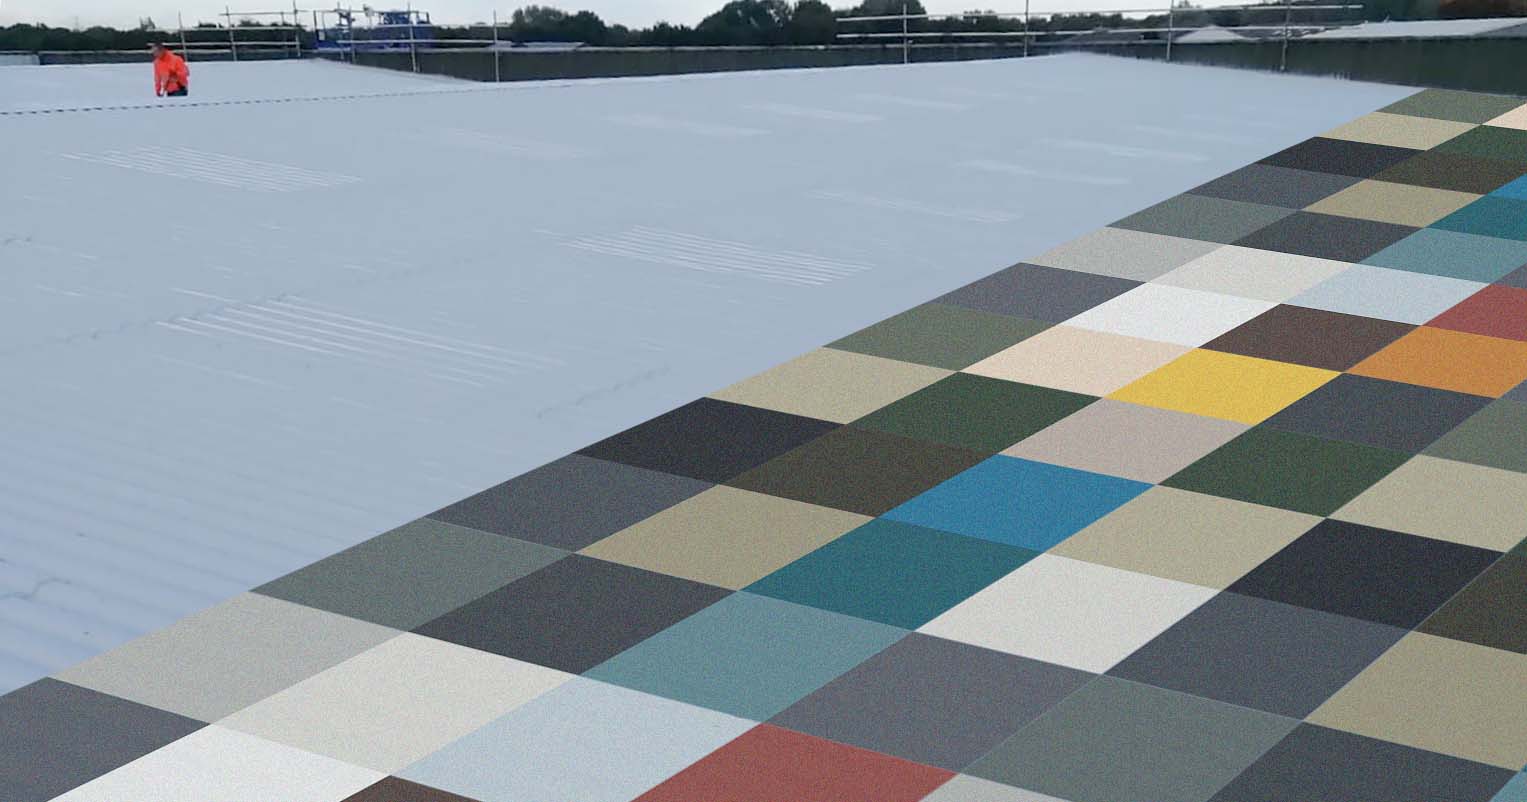 seamsil delcote colours options available hd sharman